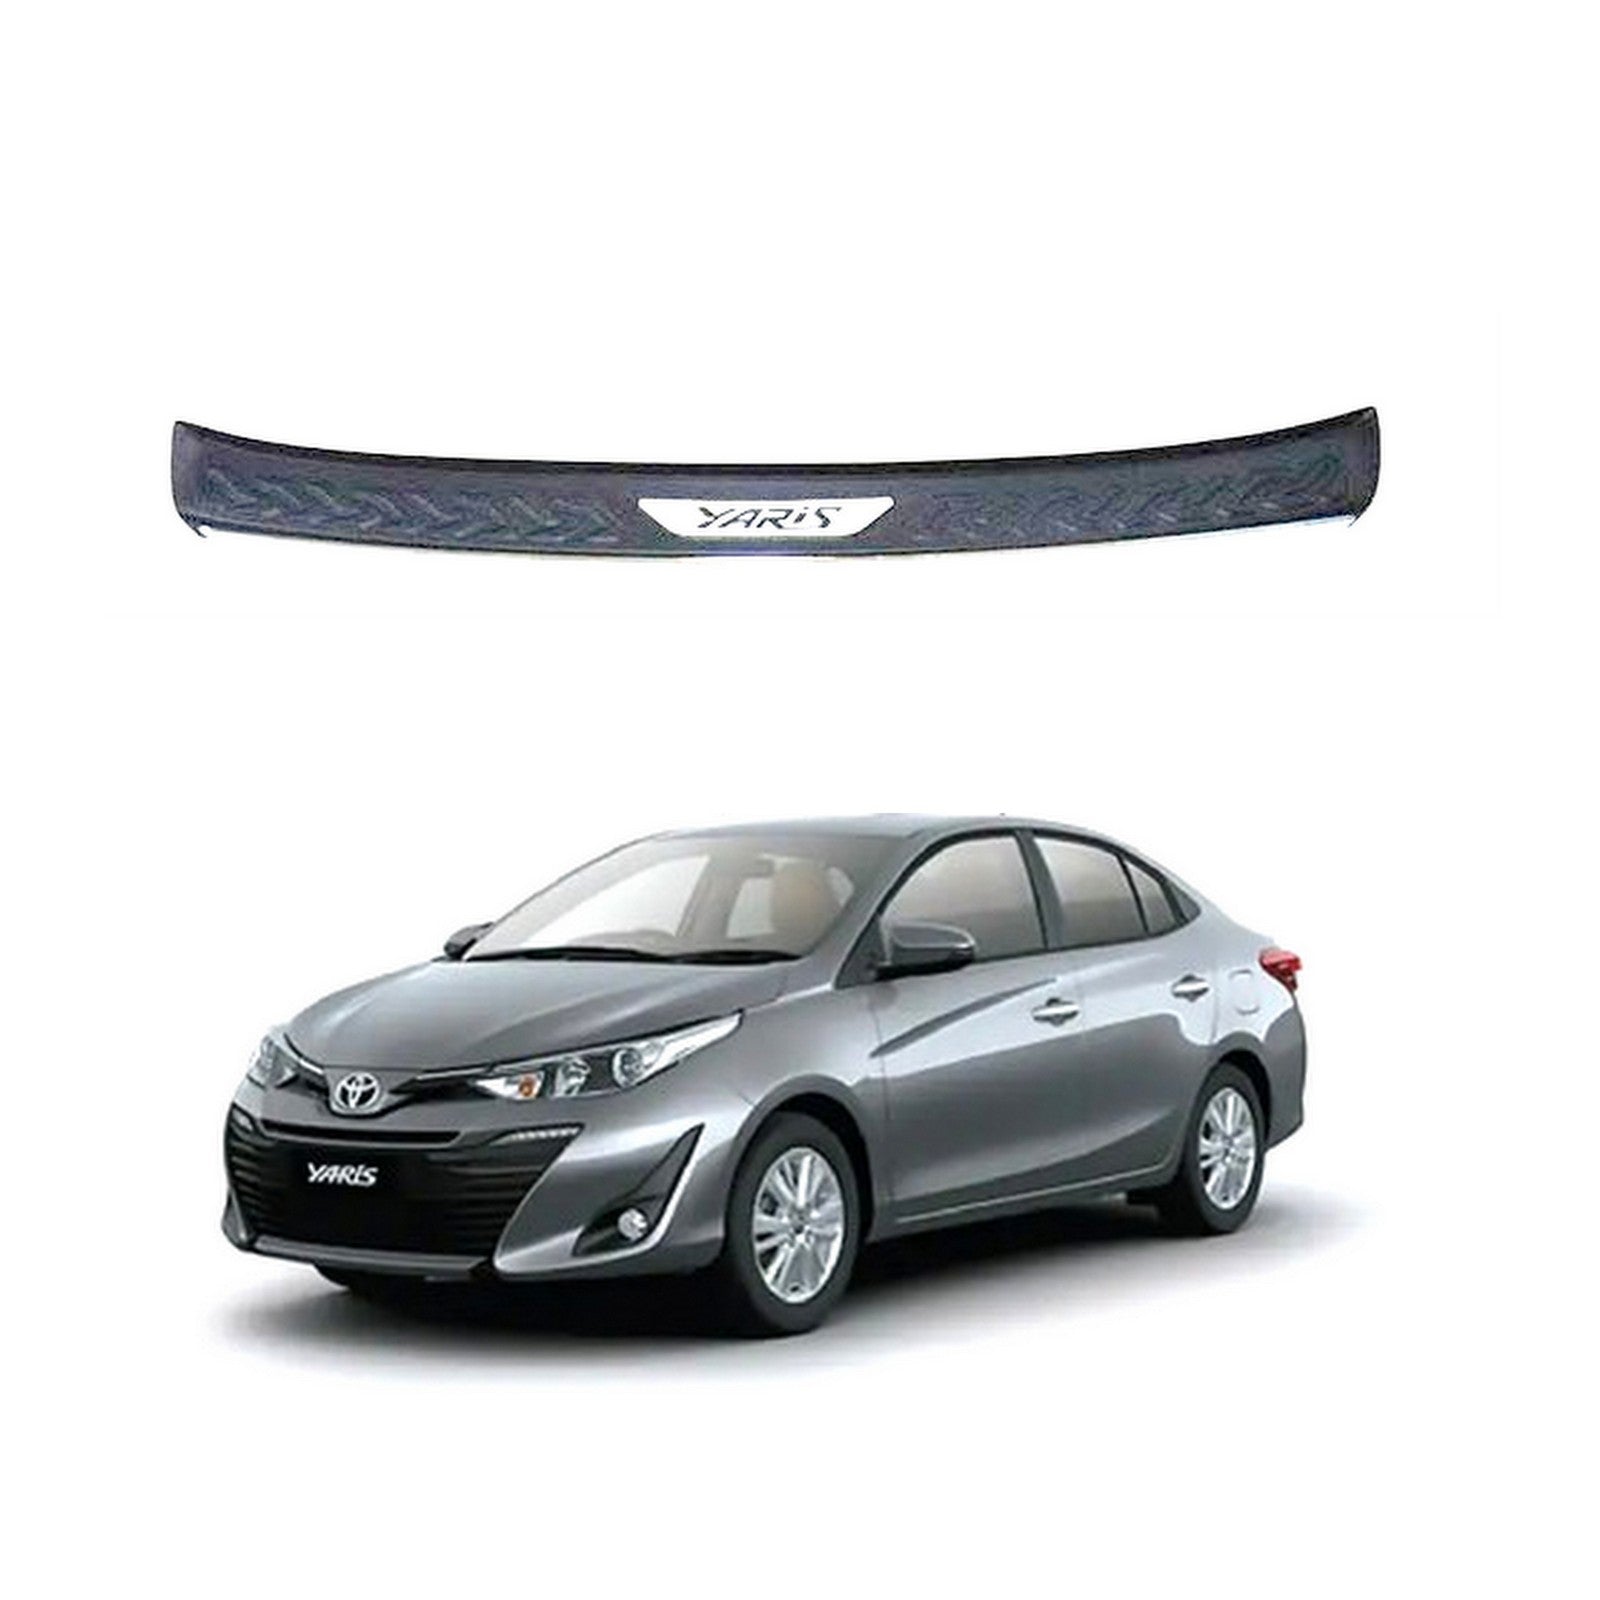 BUMPER PROTECTOR REAR FOR TOYOTA YARIS